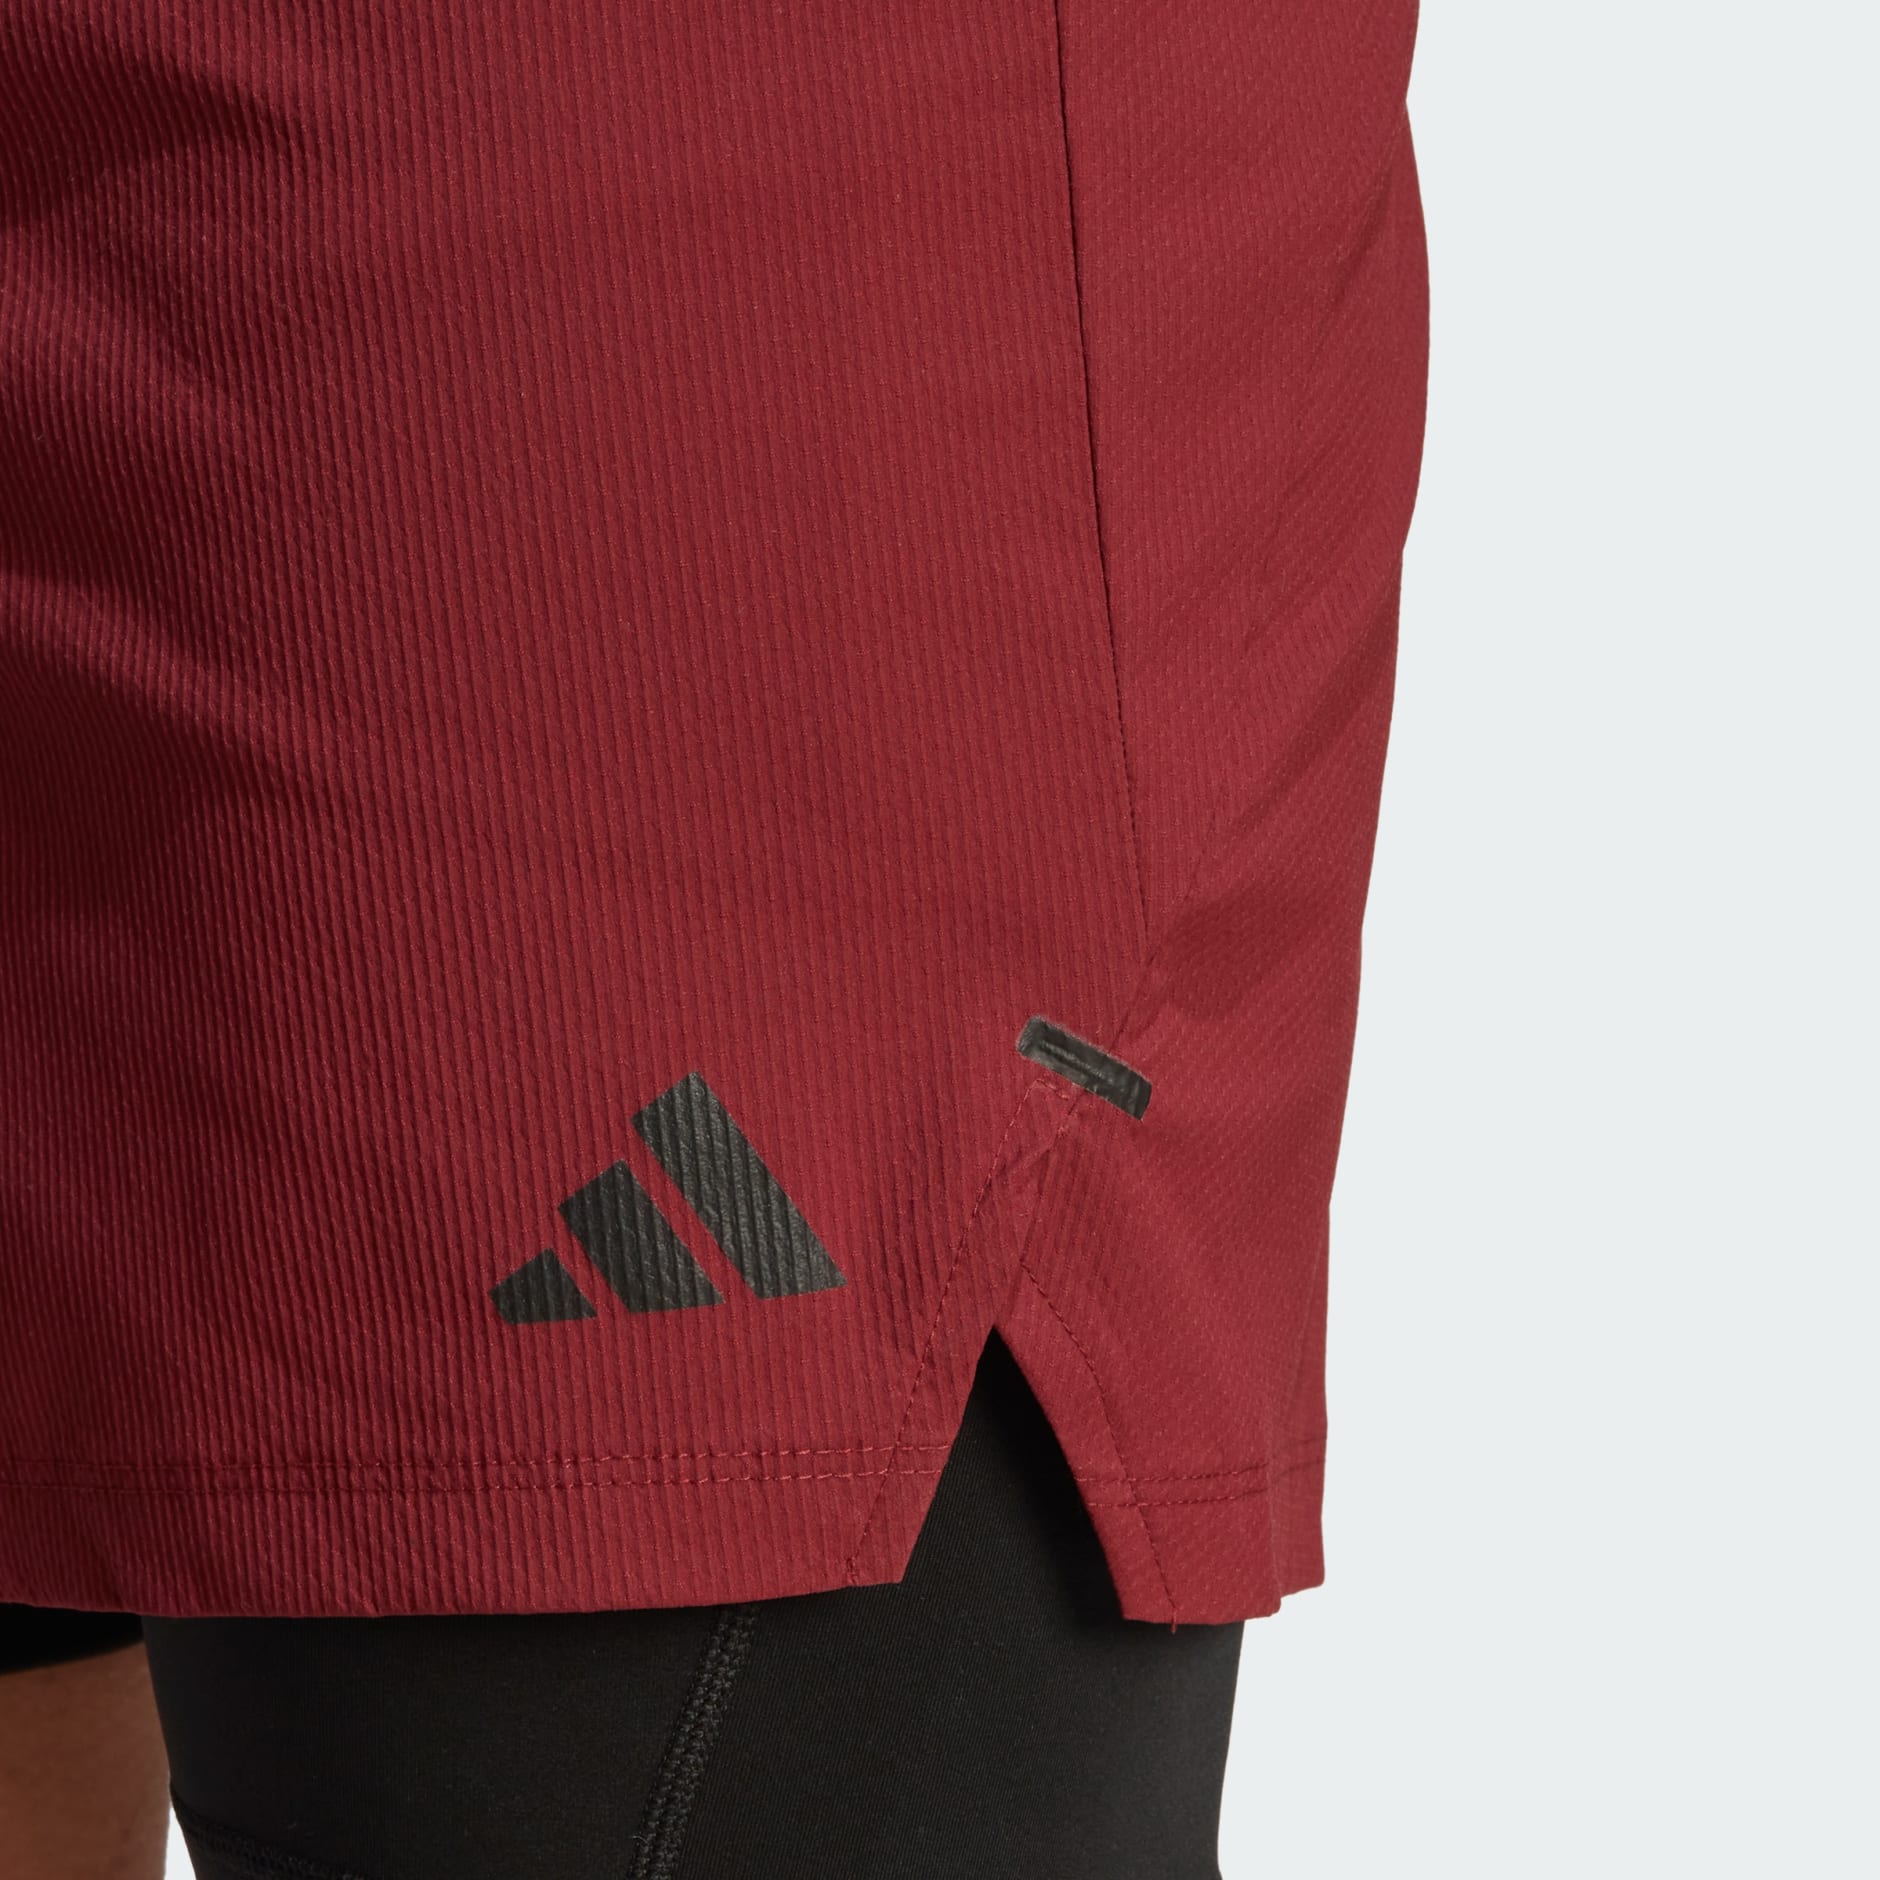 adidas Men's Power Workout Two-in-one Short